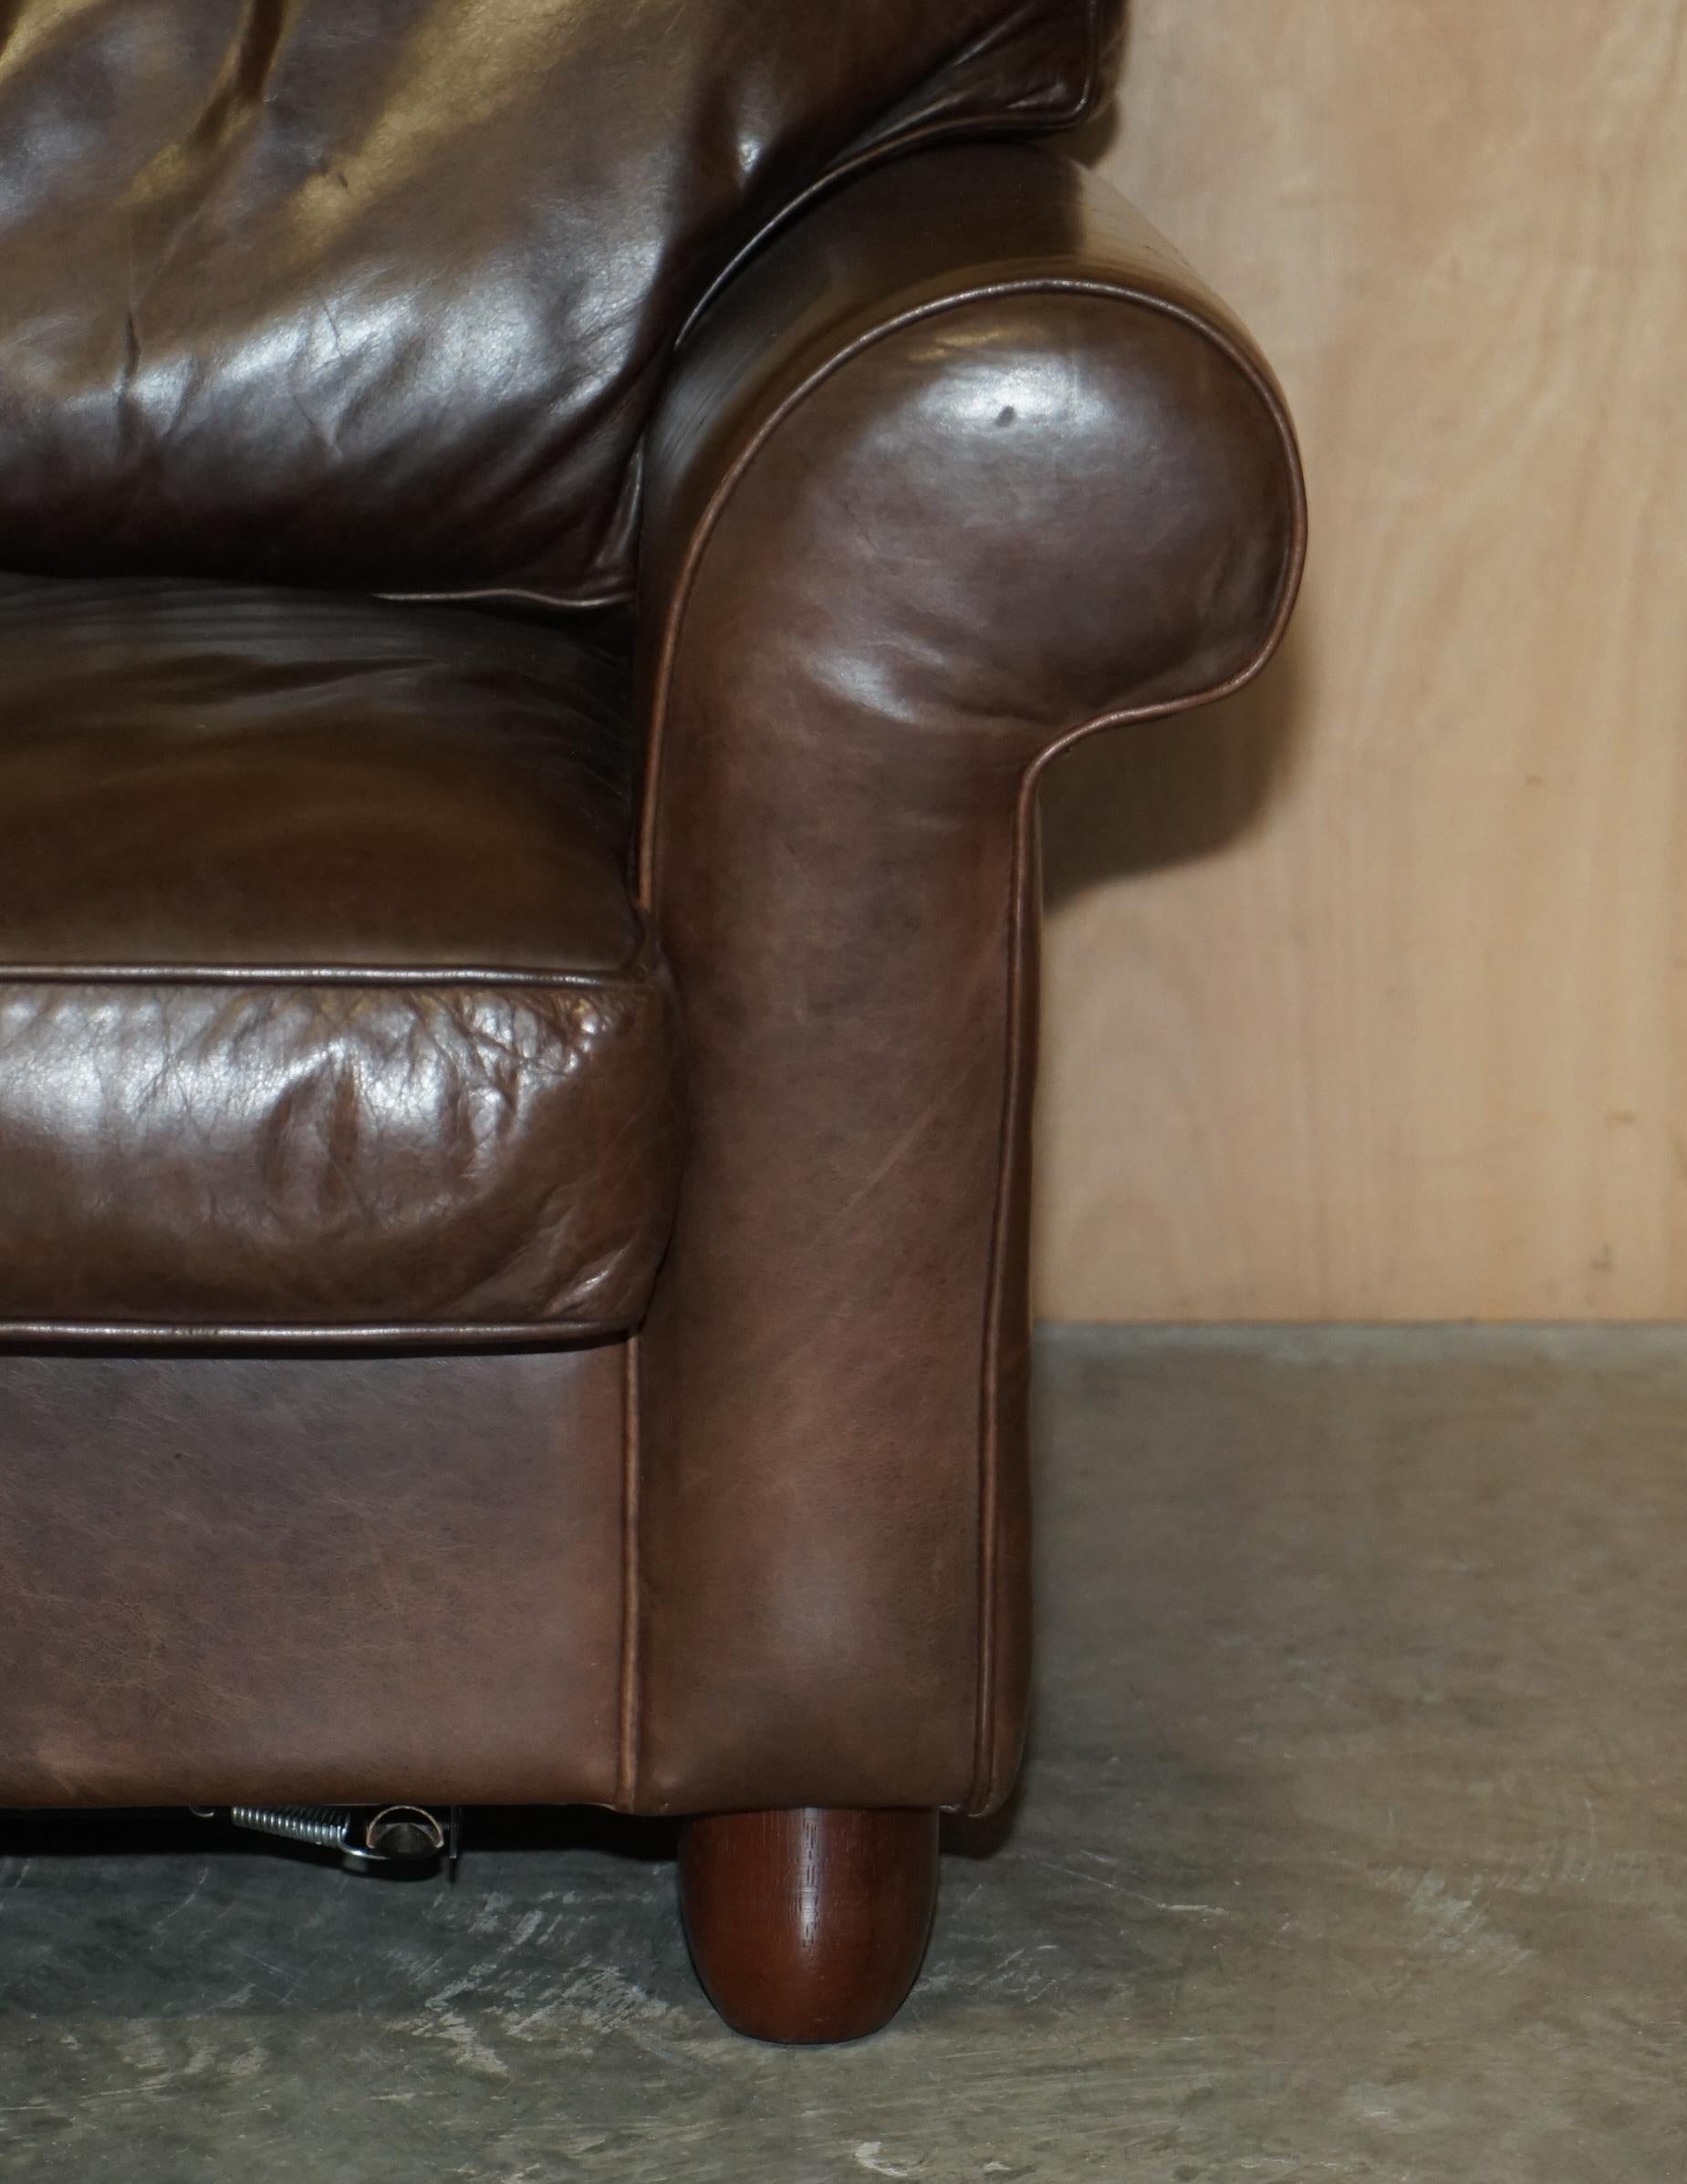 LOVELY HERITAGE BROWN LEATHER LAURA ASHLEY MORTIMER SOFABED IN SEHR GUTEM ZUSTAND im Angebot 1